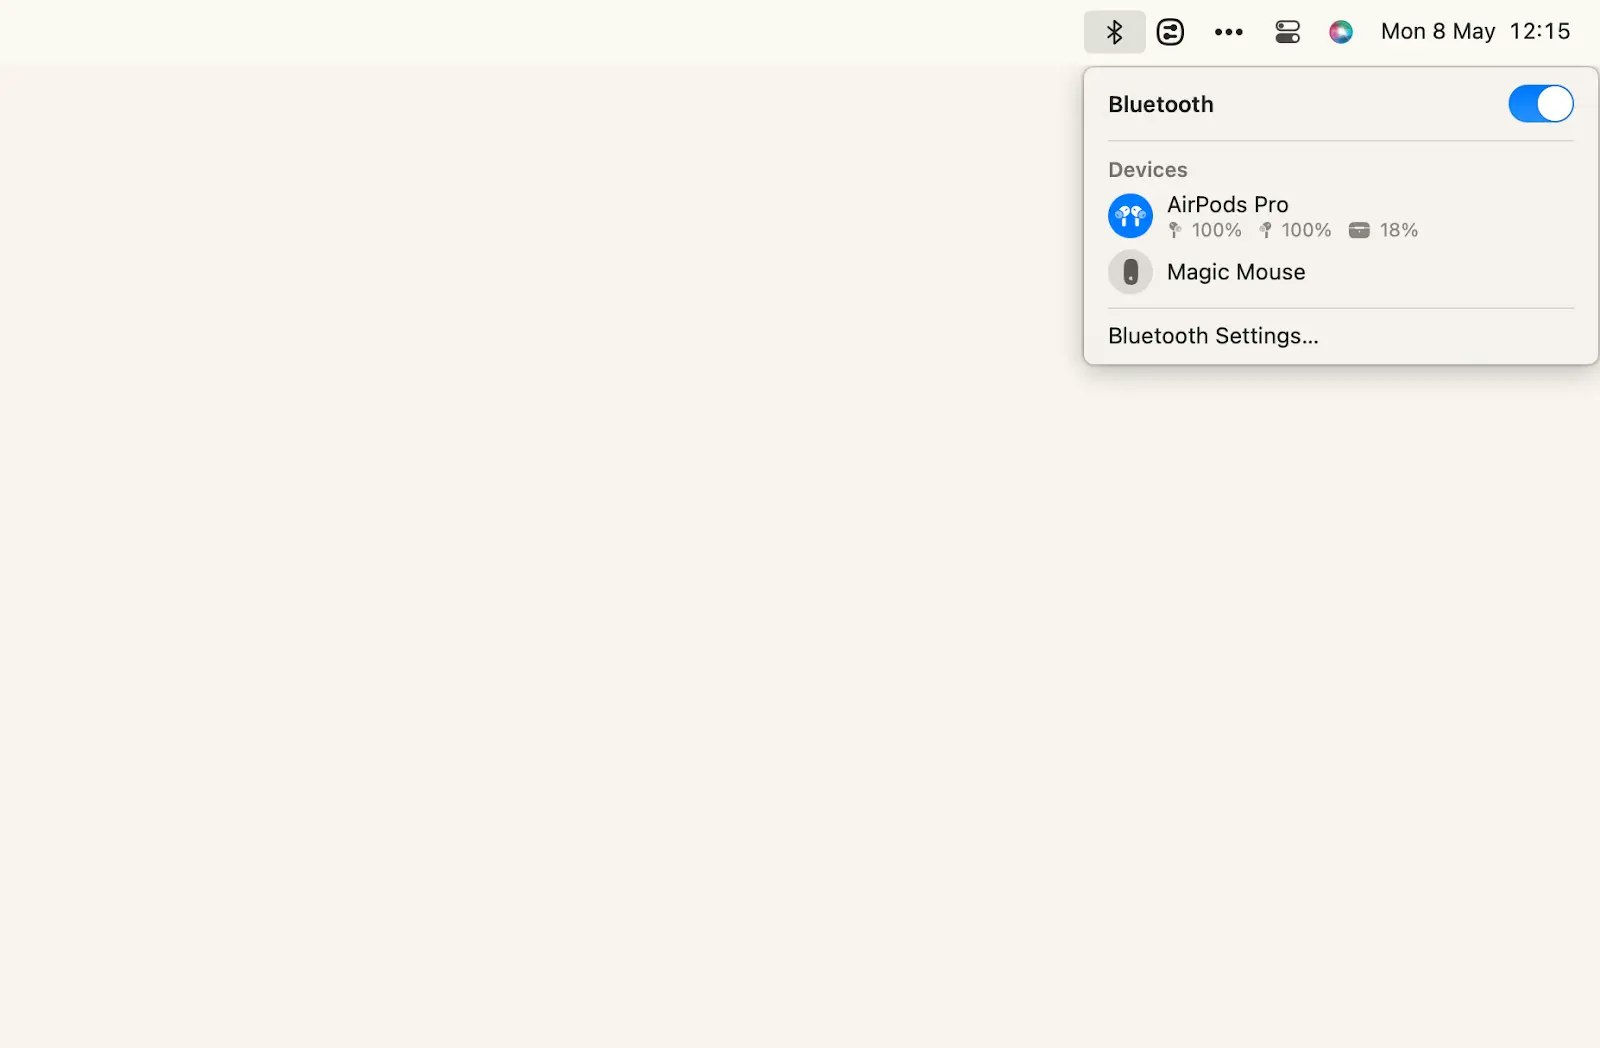 macOS's Bluetooth option to see AirPods battery charge level